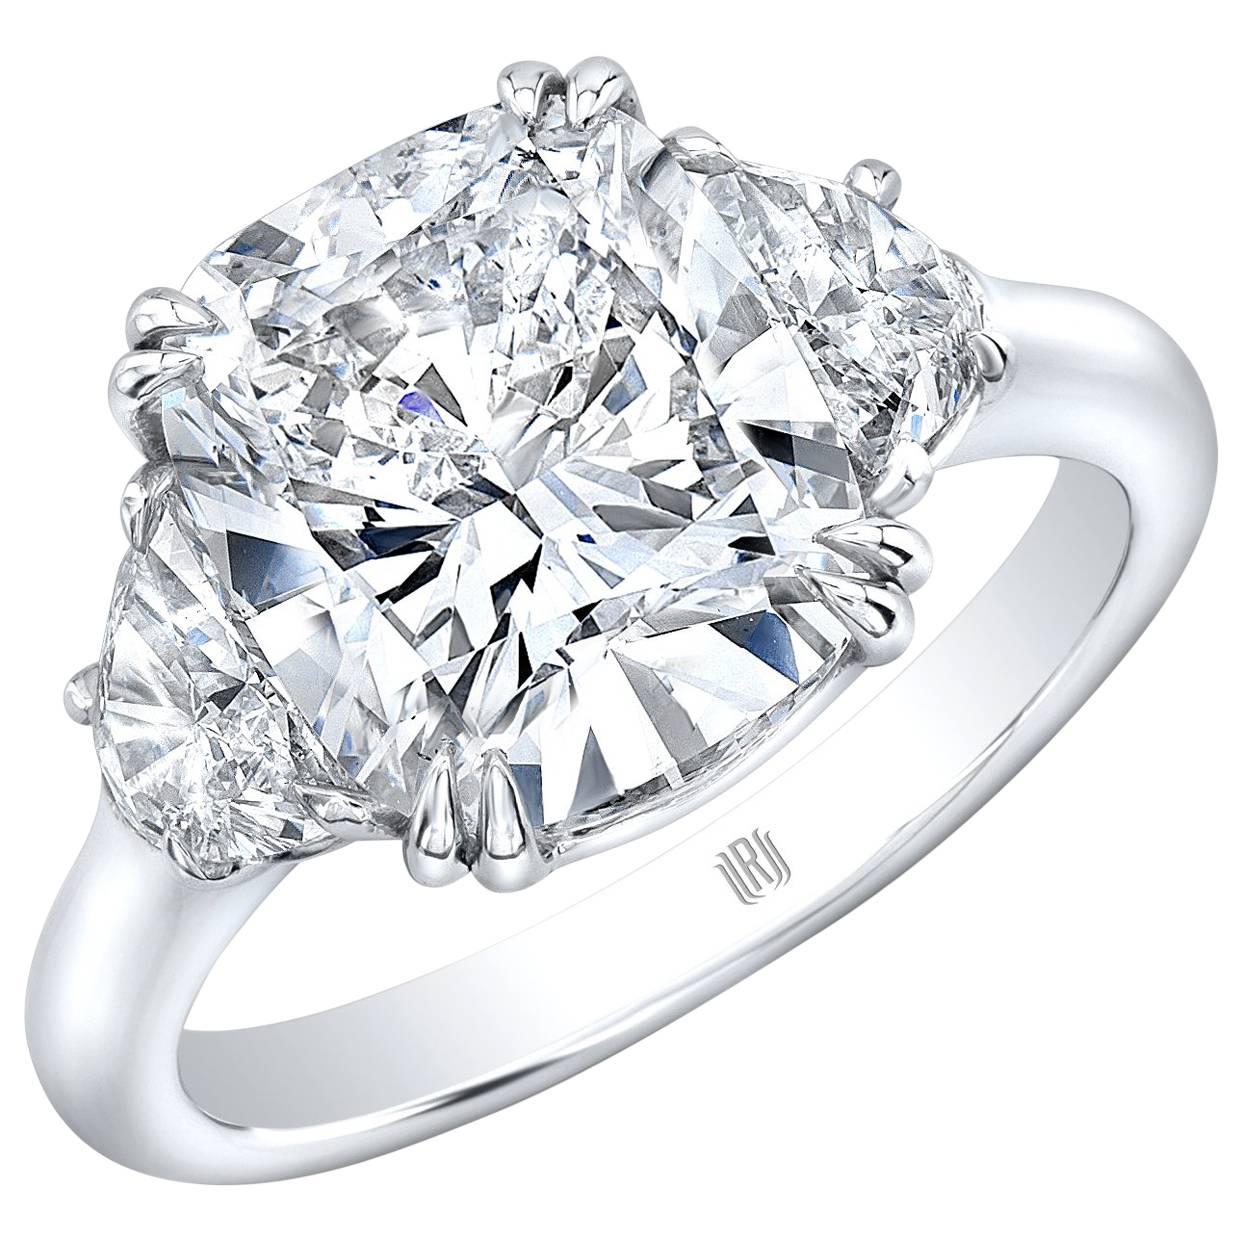 4.01 Carat GIA Certified G SI2 Cushion Cut Diamond Platinum Engagement Ring For Sale